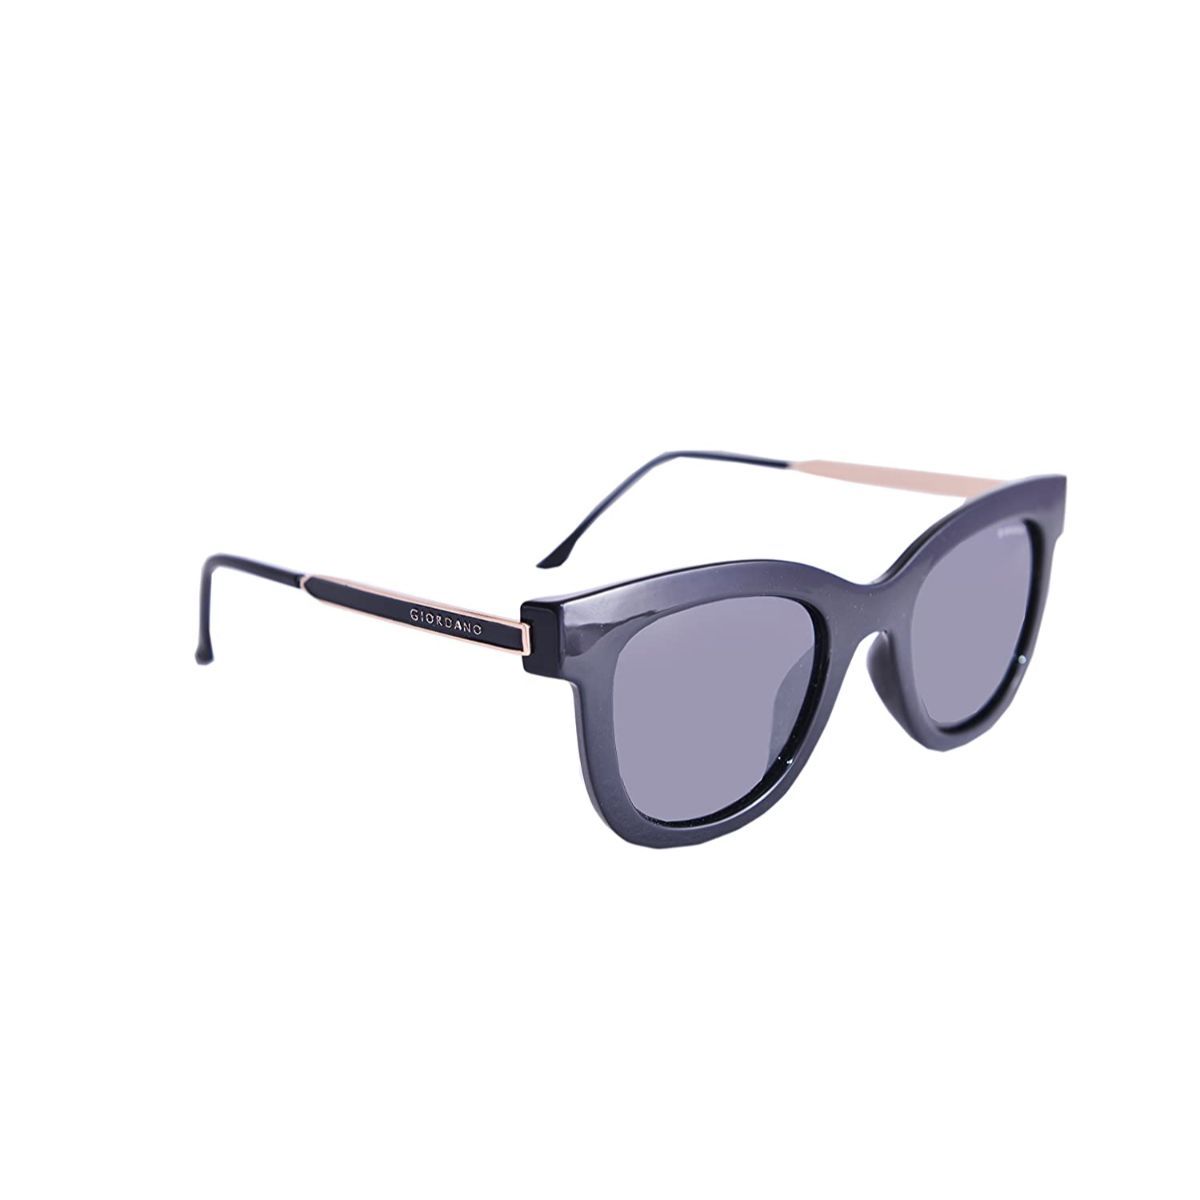 Discover more than 208 giordano sunglasses online latest